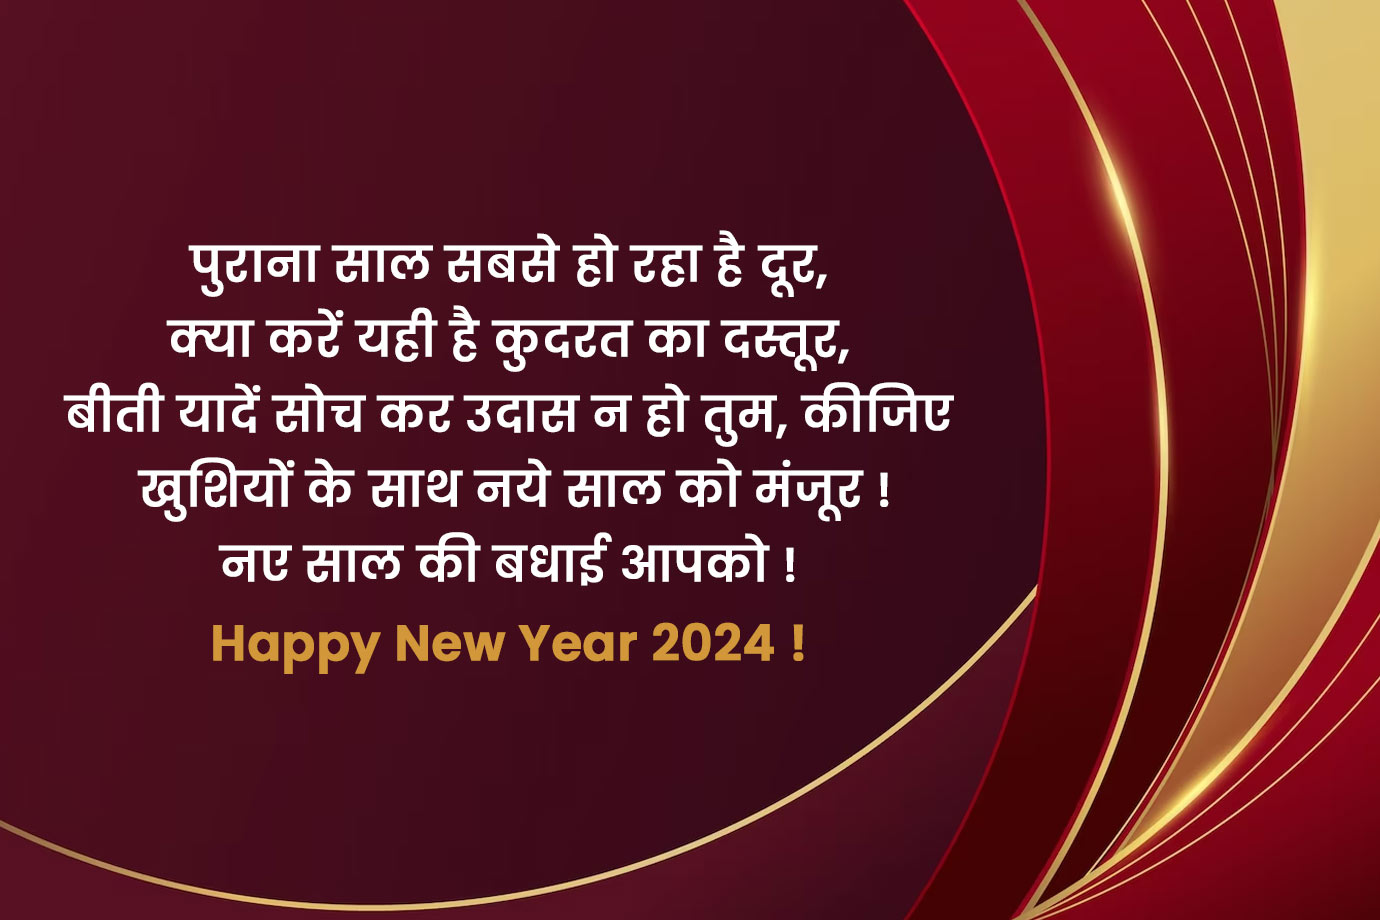 Happy New Year Wishes Quotes And Message In Hindi हैप्पी न्यू ईयर विशेज